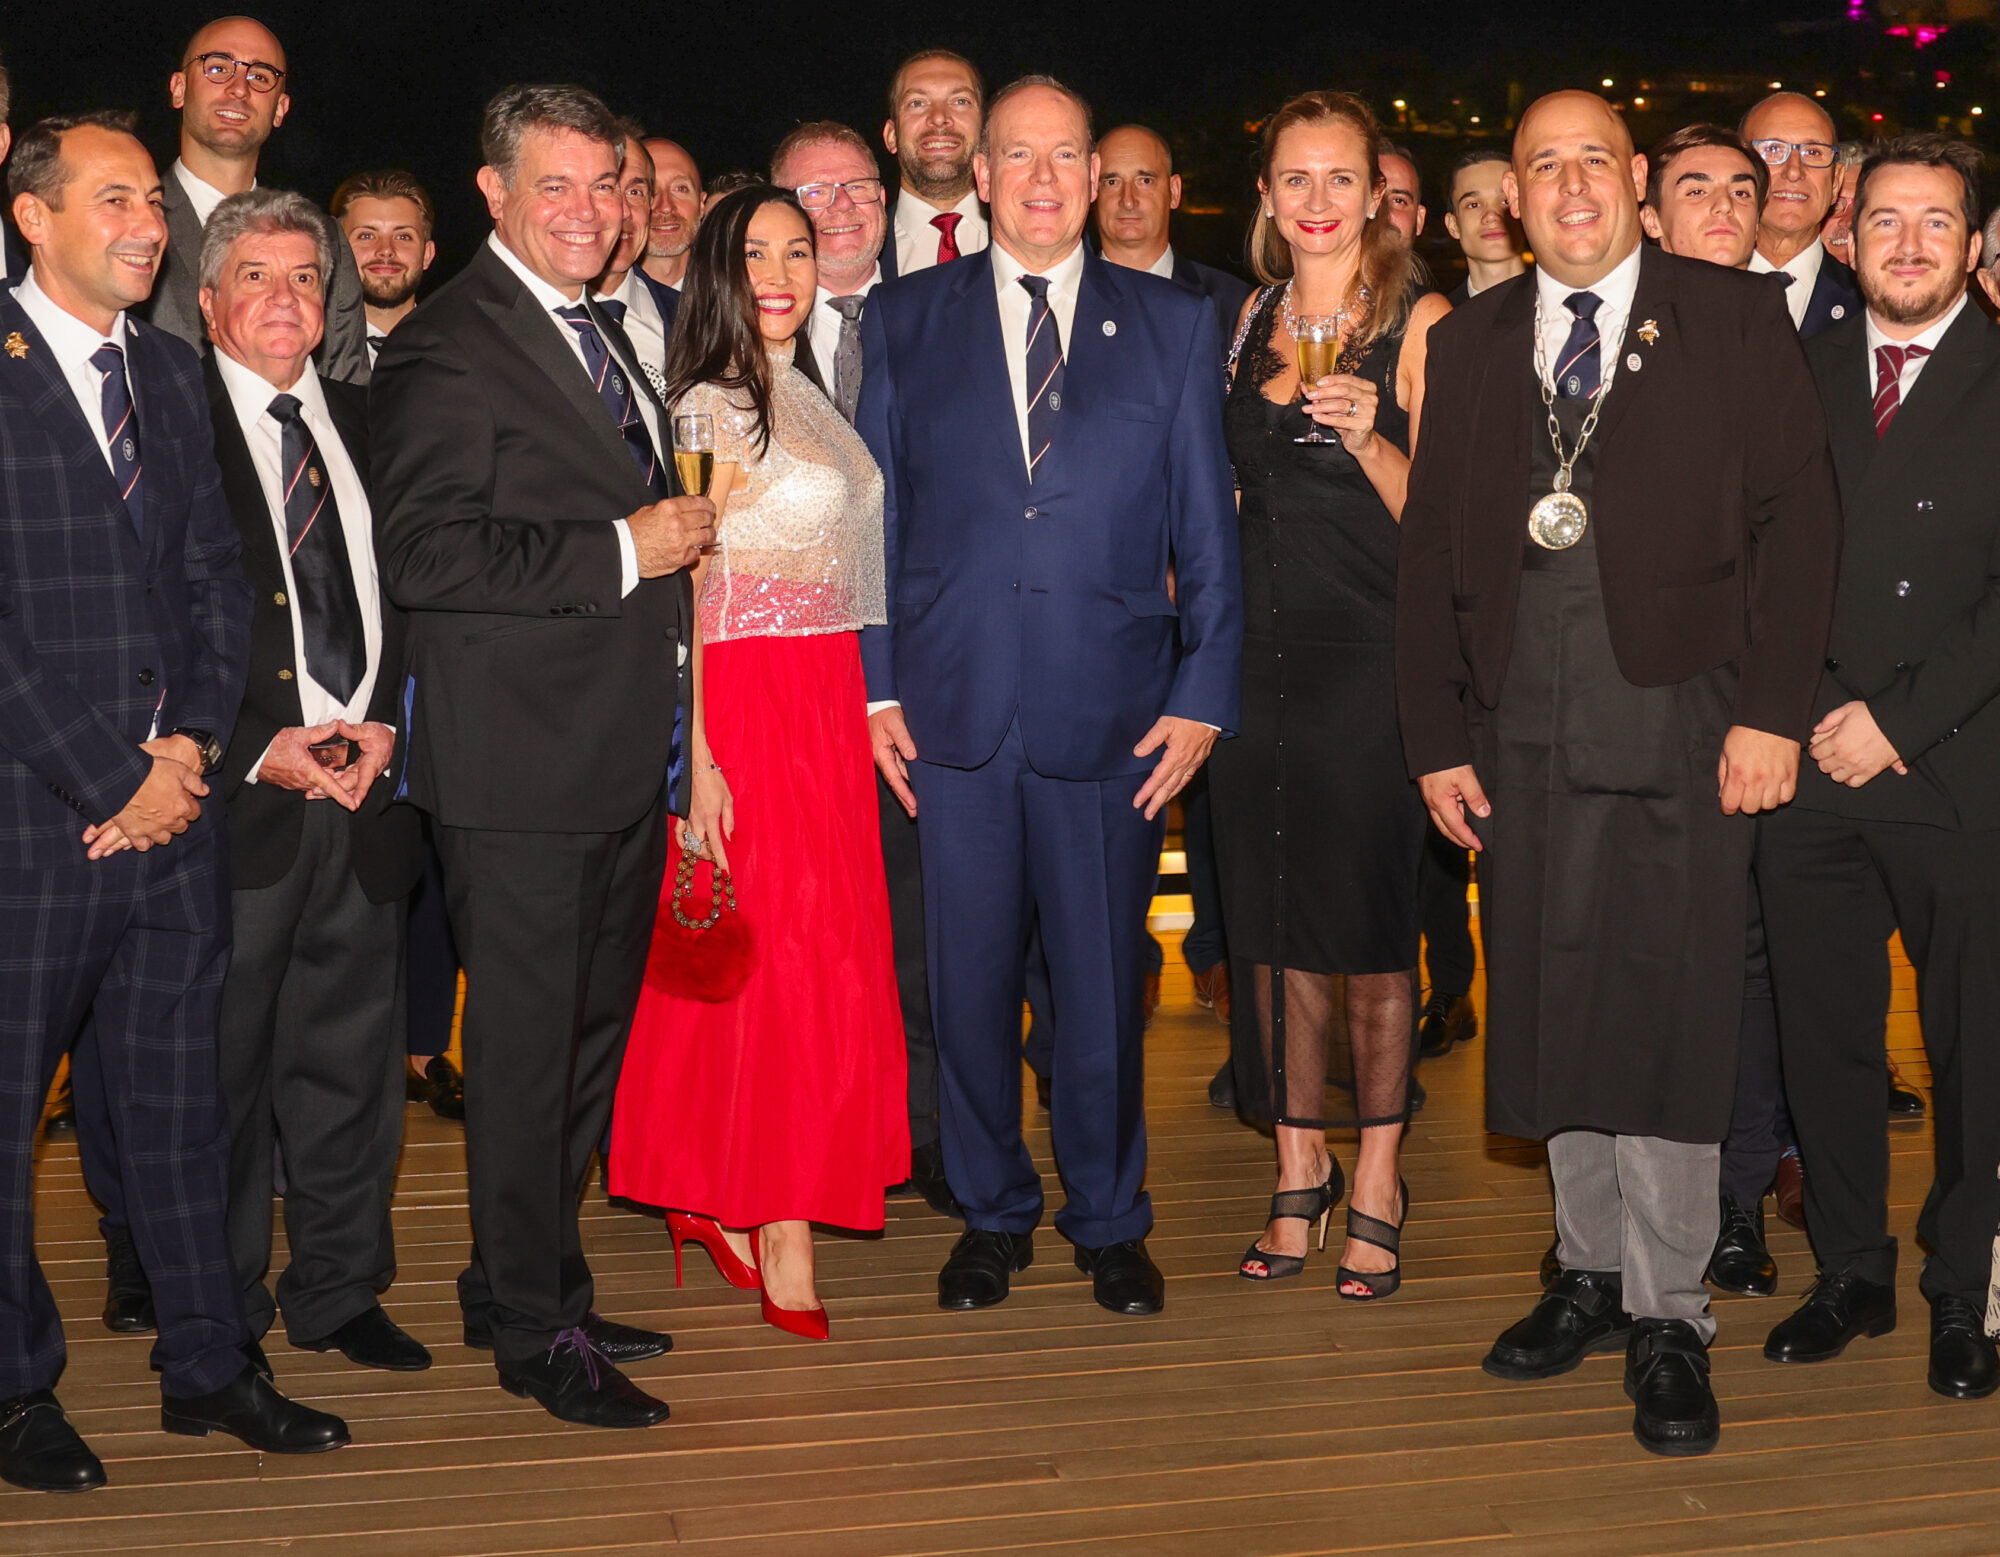 Prince Albert II of Monaco with Dominique Milardi, the President the Association Monegasque des Sommelier, Gulshat Uzenbaeva, LUXPRO event company Founder, Lionel Compan, Chef Sommelier of the YCM, Julia Scavo, Champion of the World of the blind wine degustation and other members of the AMS